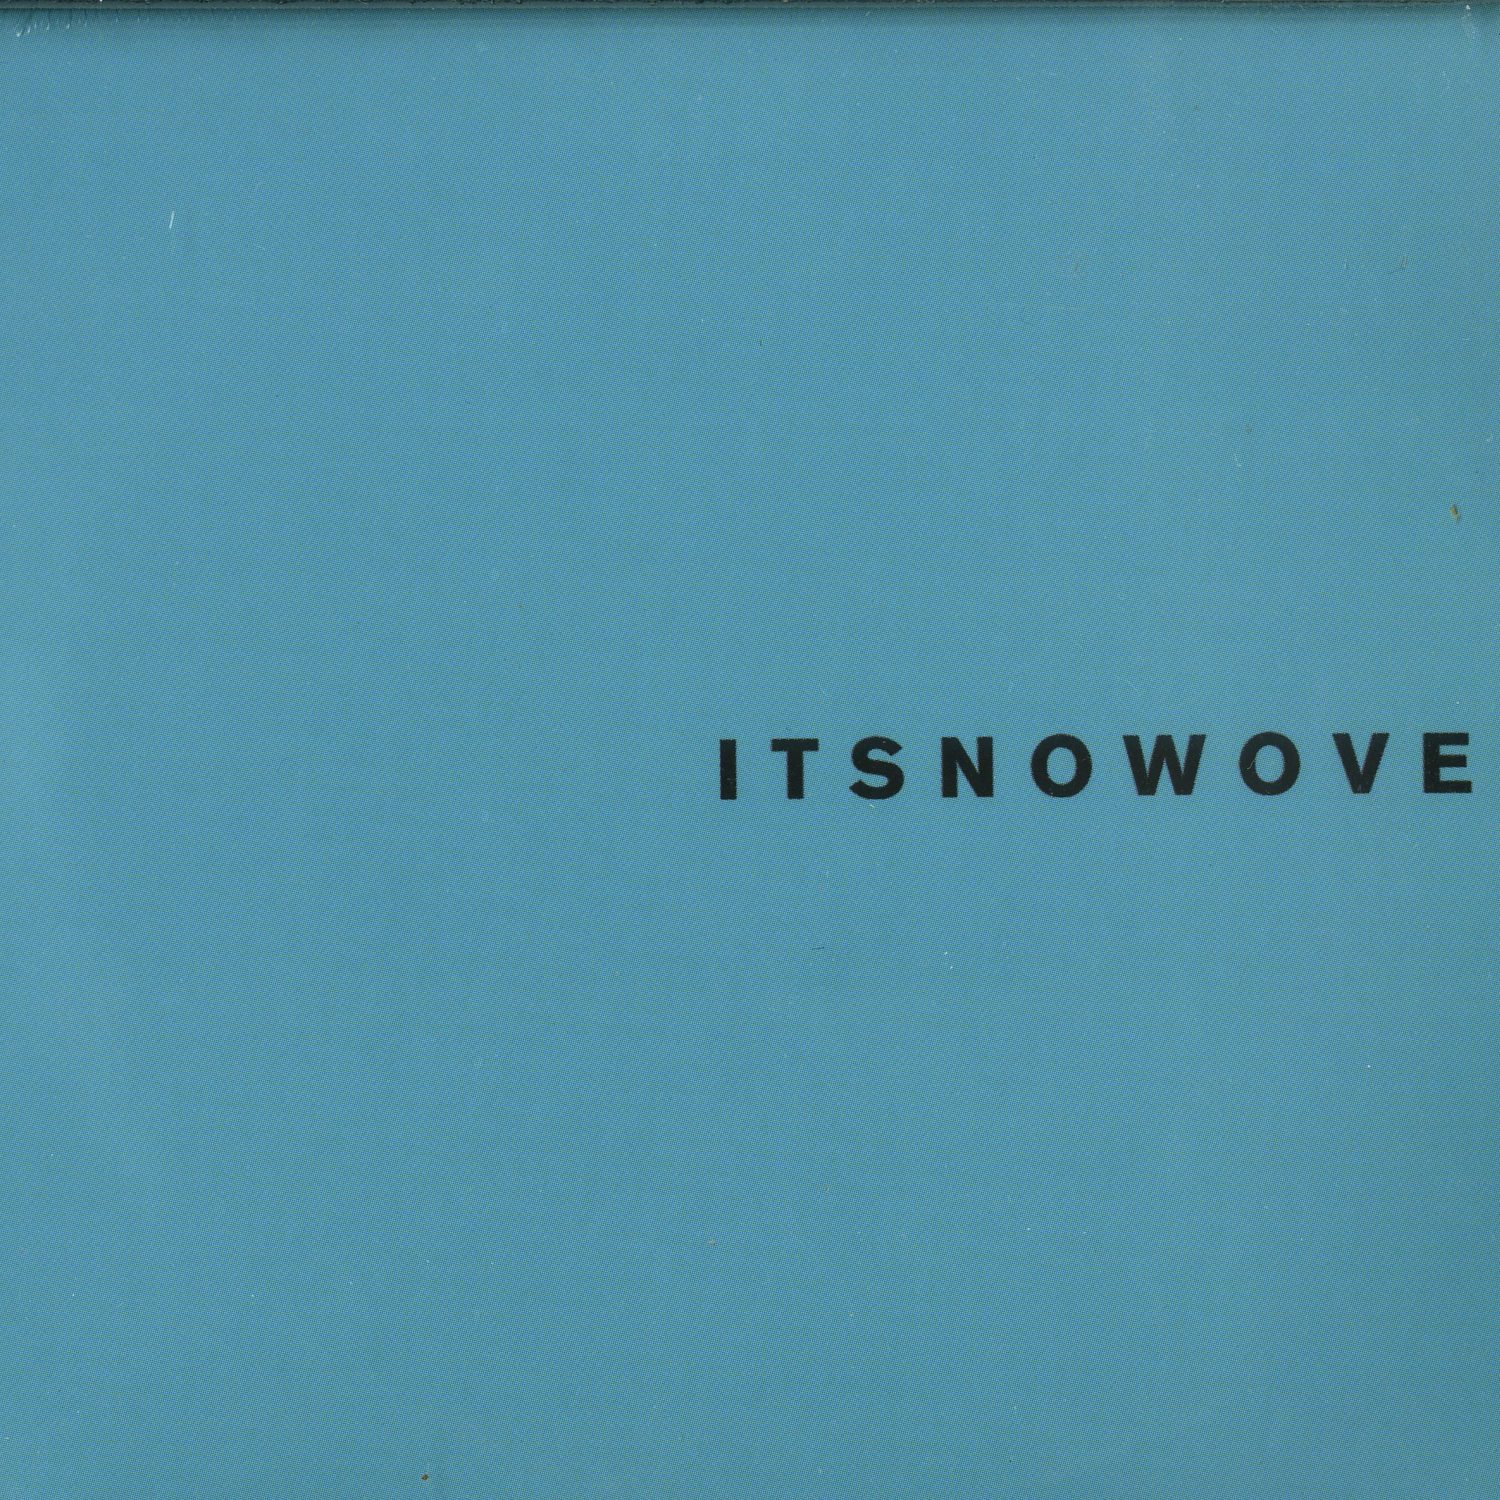 Itsnotover - ITS NOW OVER 